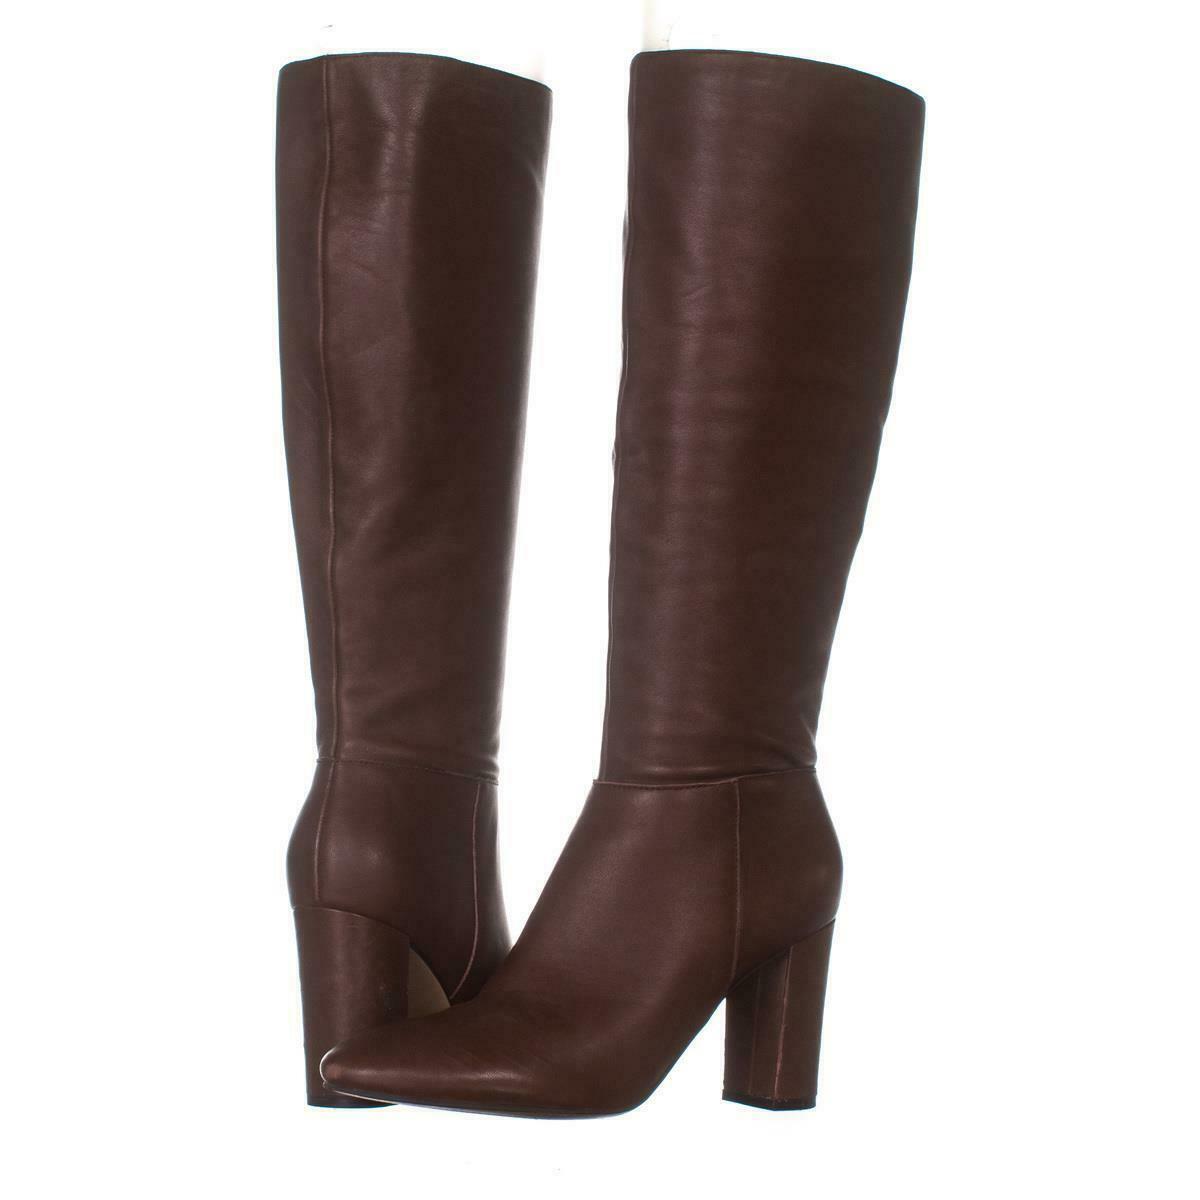 Marc Fisher Zimra Knee High Riding Boots 757, Medium Brown Leather, 8 ...